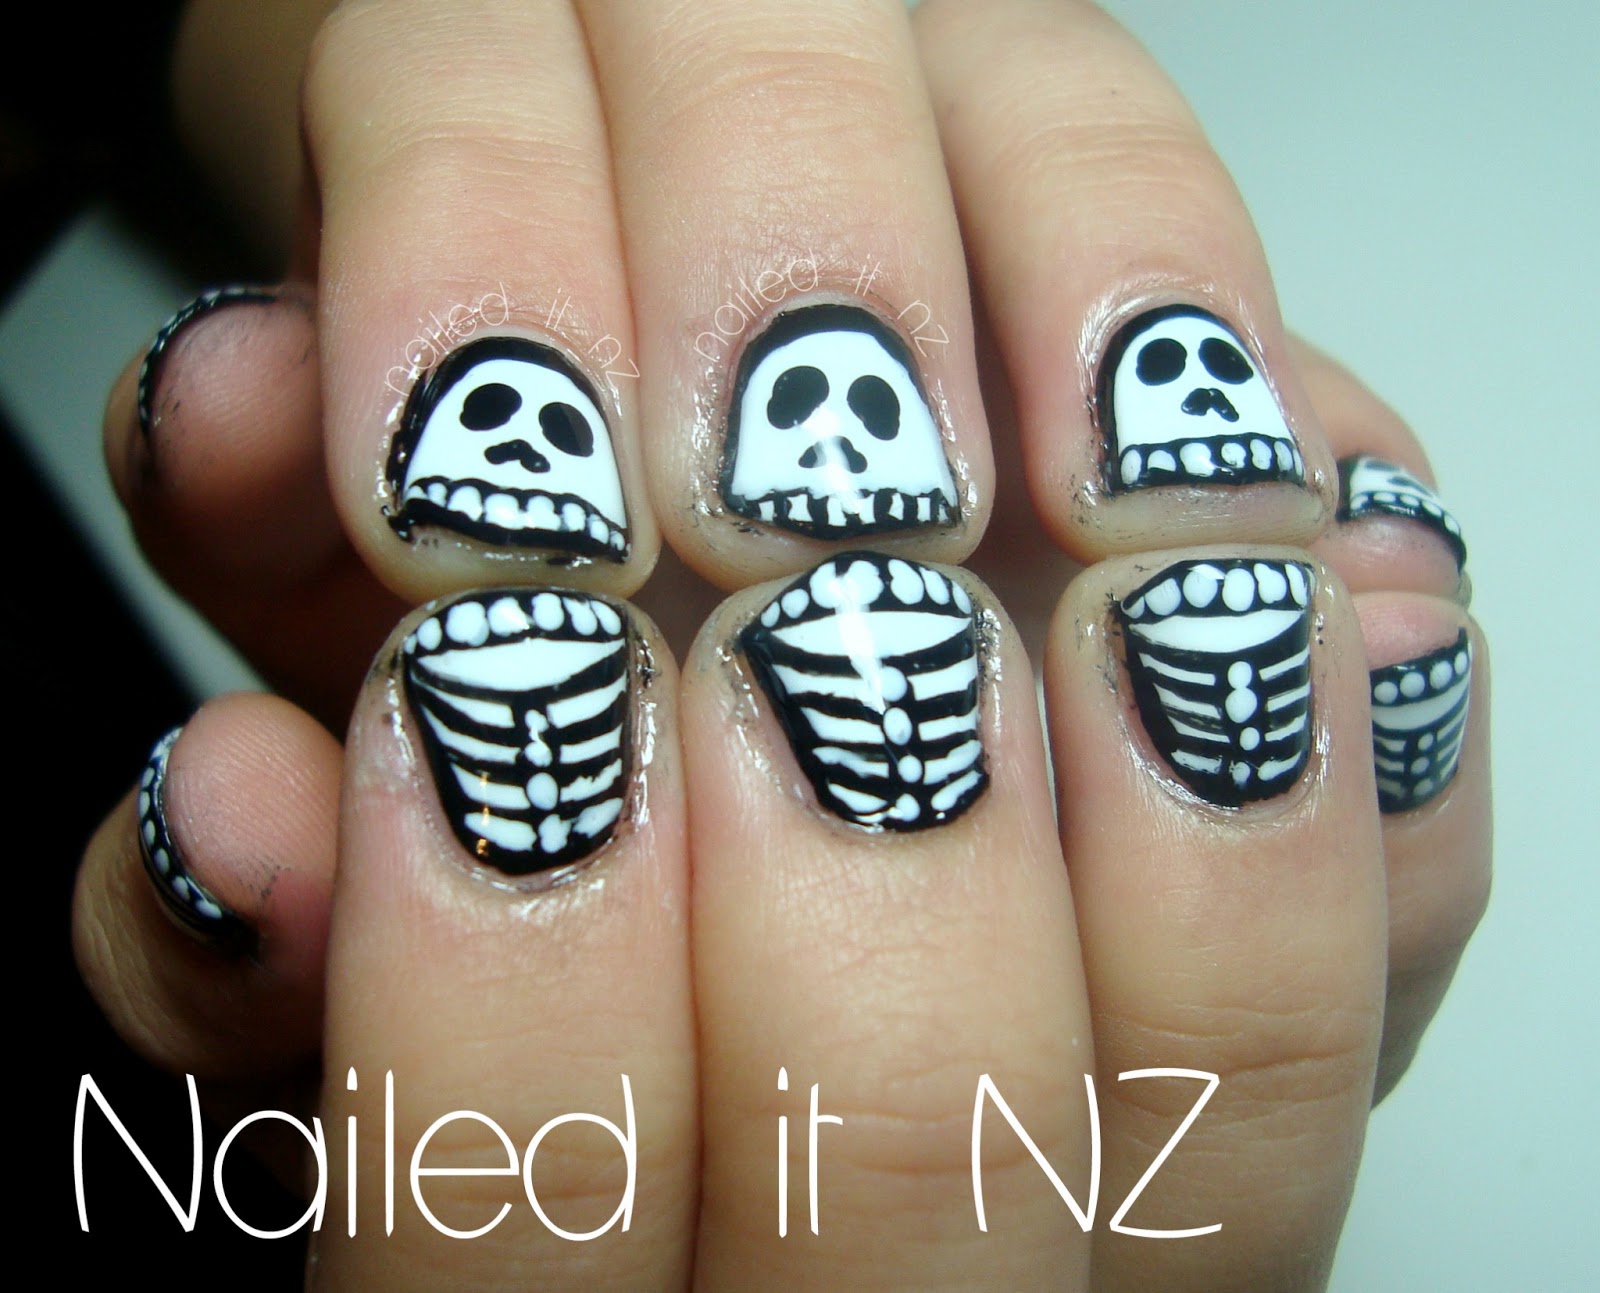 2. "Candy Skull Nail Art Designs" - wide 3